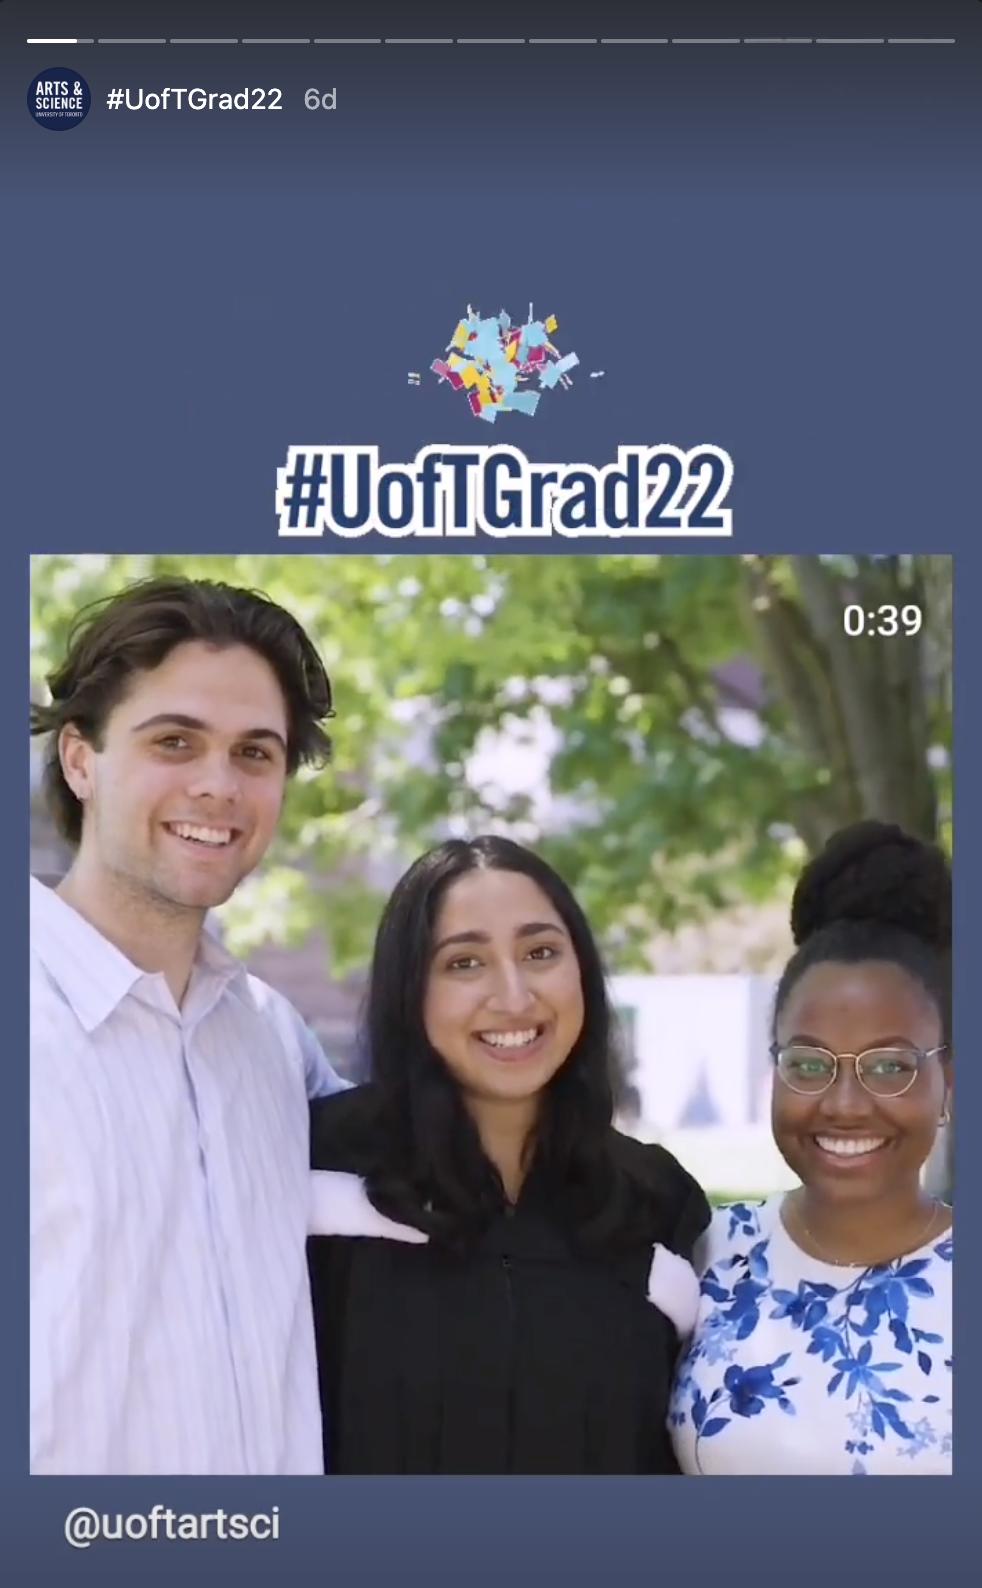 Arts and Science instagram account's collection of stories for Spring Convocation 2022